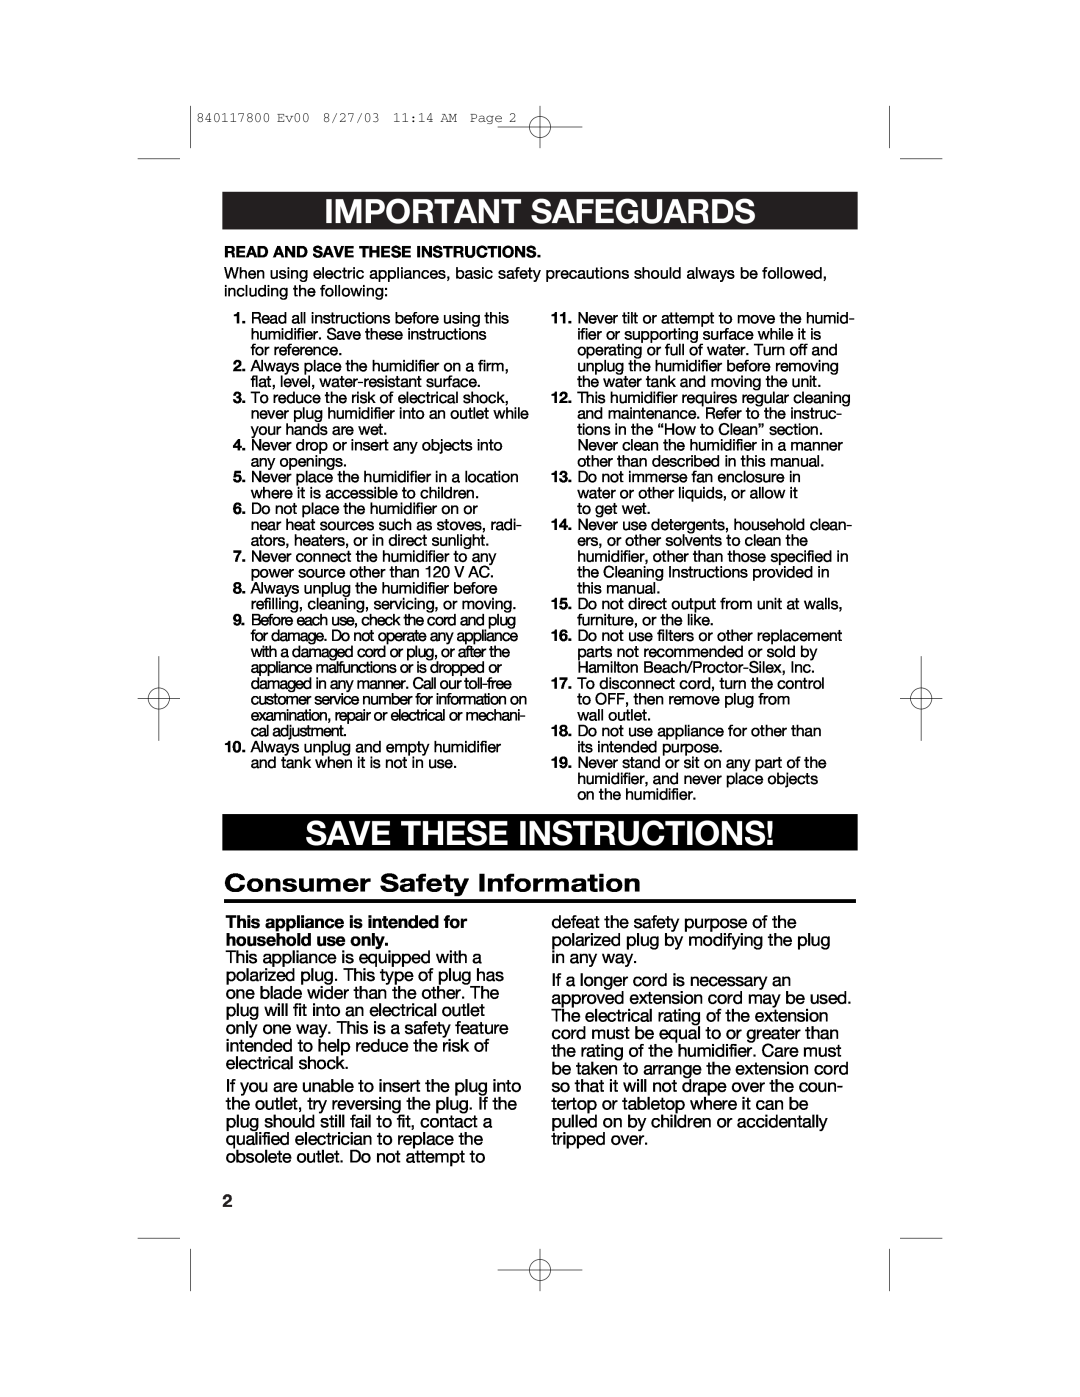 Hamilton Beach 840117800 manual Important Safeguards, Save These Instructions, Consumer Safety Information 